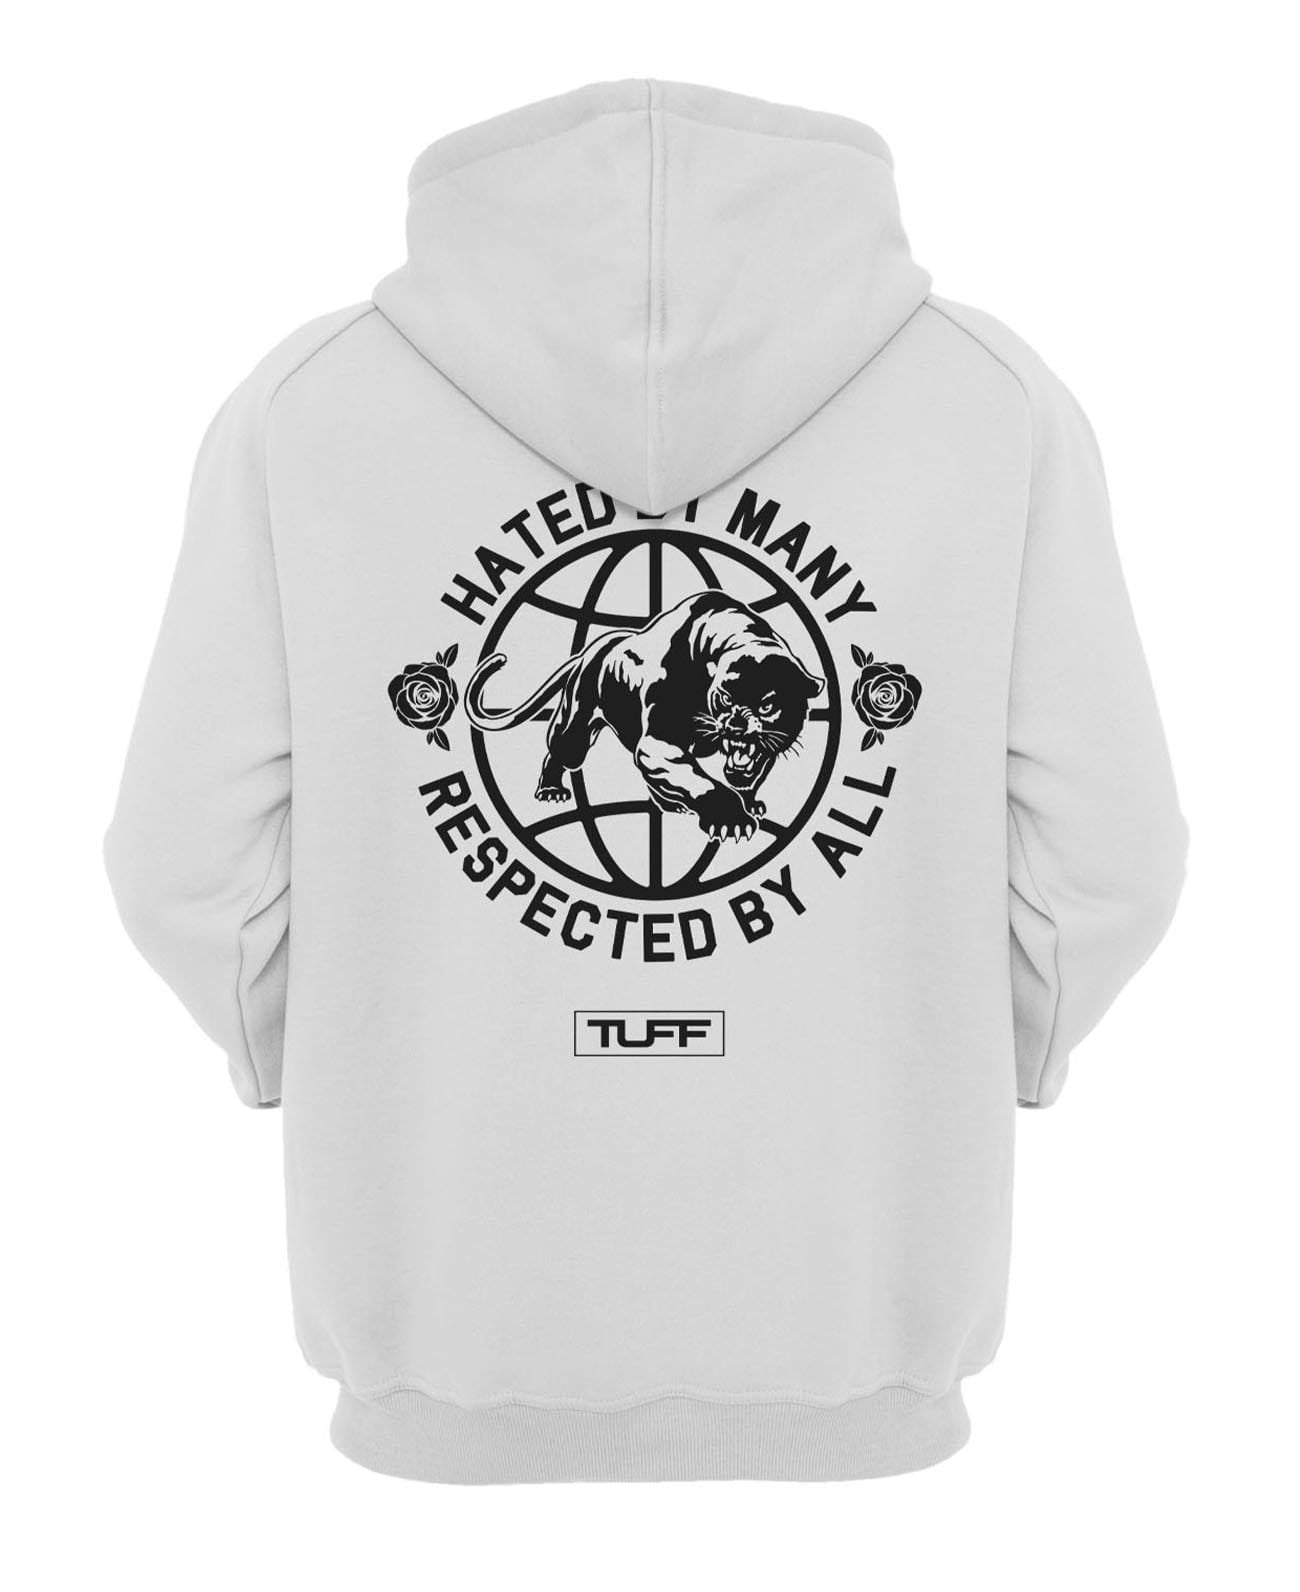 Hated By Many, Respected By All Hooded Sweatshirt XS / White TuffWraps.com